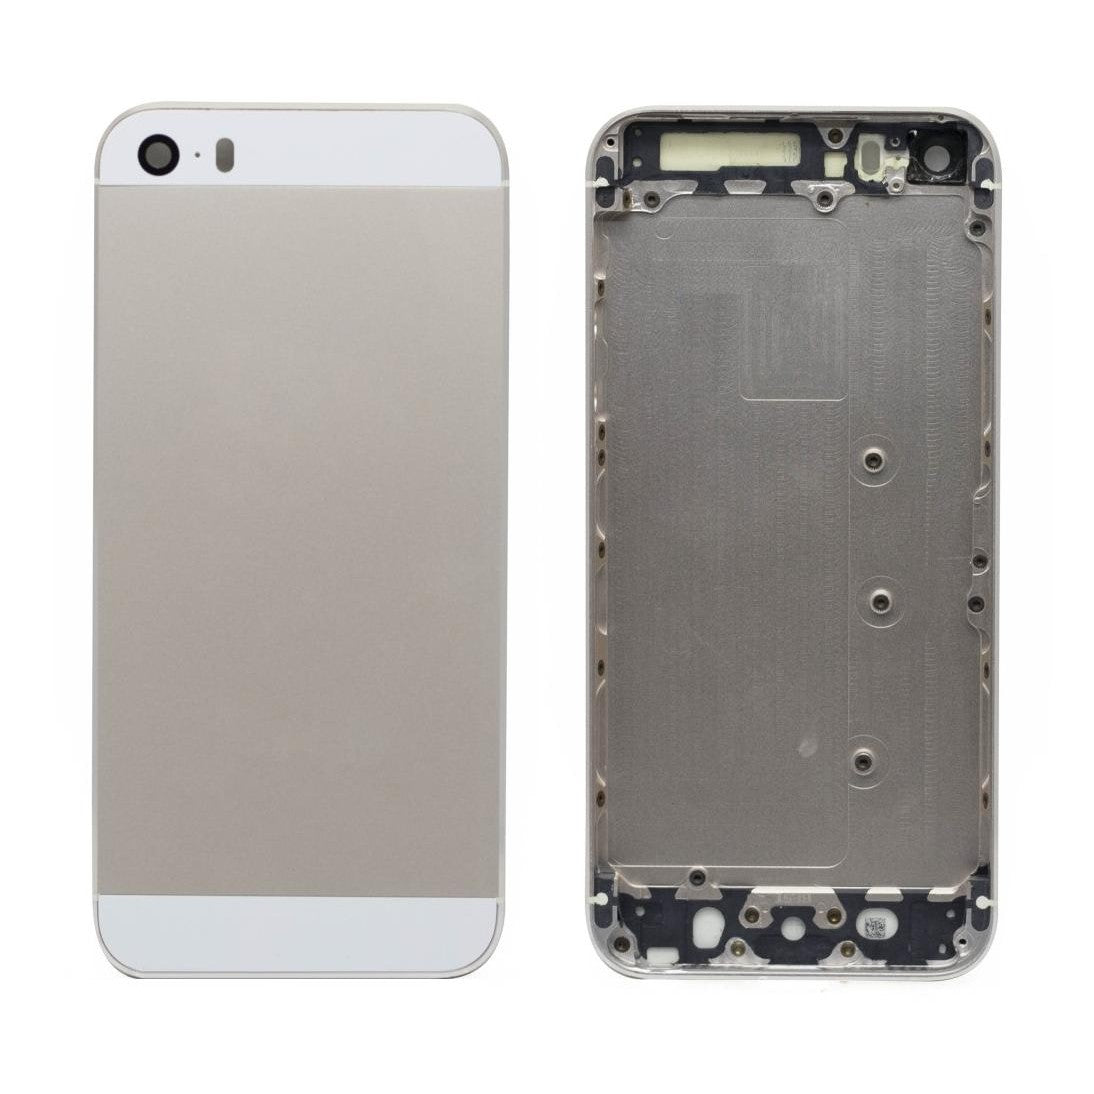 Housing For Iphone 5S